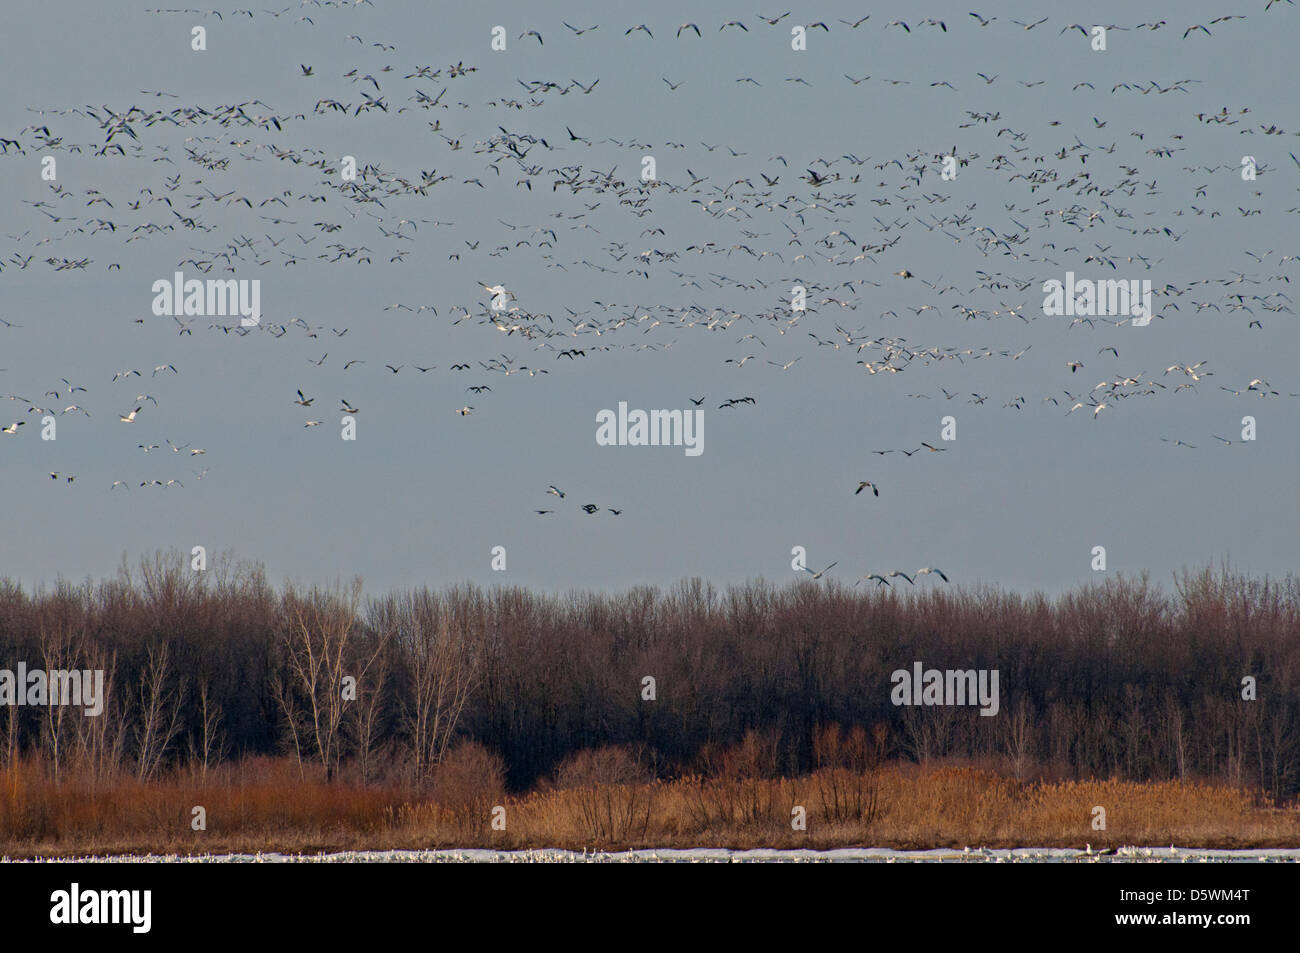 Vast flocks of Snow Geese lifting off into the sky during spring migration. Stock Photo